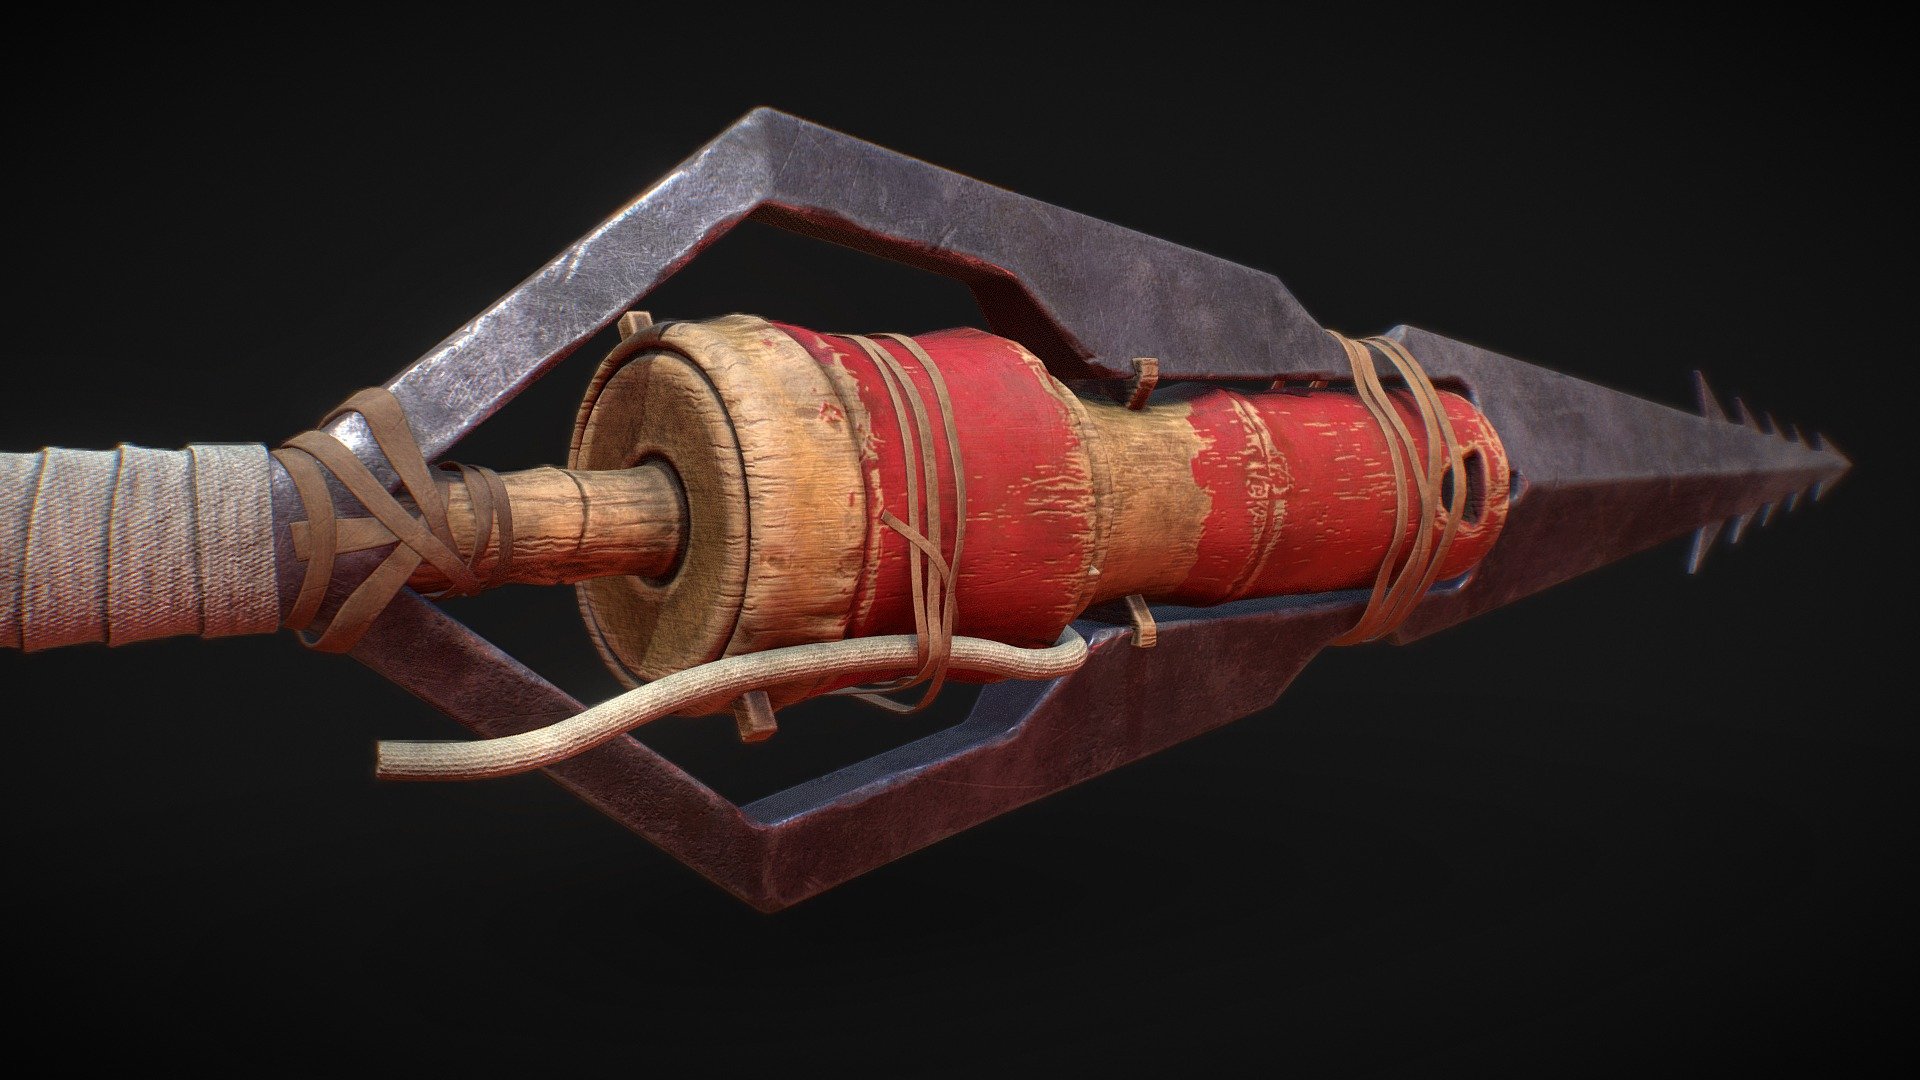 One of the 3 props I made for Artstation Feudal Japan challenge.
For more check out my submission page: https://goo.gl/deE3wD
and artstation post: https://goo.gl/cZCrbC - Explosive Kunai Feudal Japan challenge - 3D model by Artem Mykhailov (@CGArtem) 3d model